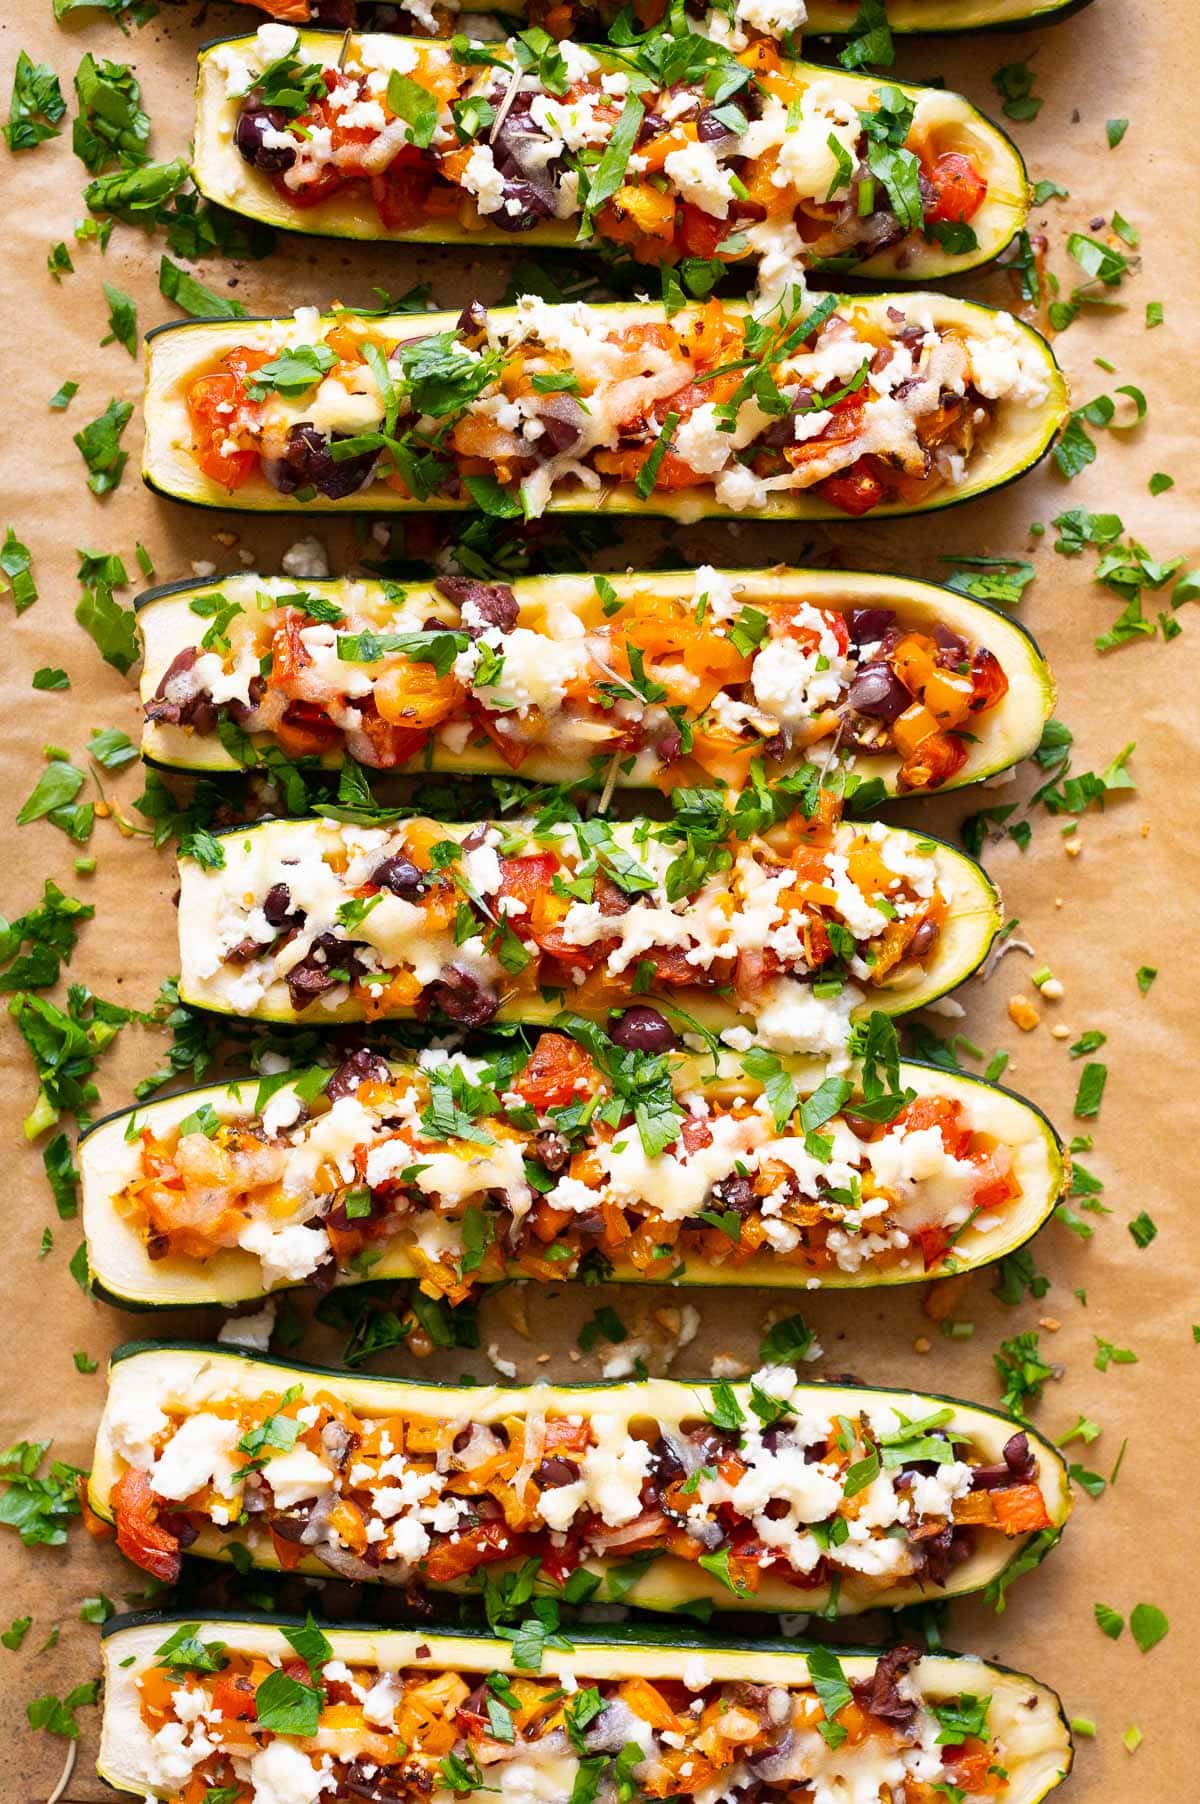 Mediterranean zucchini boats garnished with parsley on parchment paper lined tray.